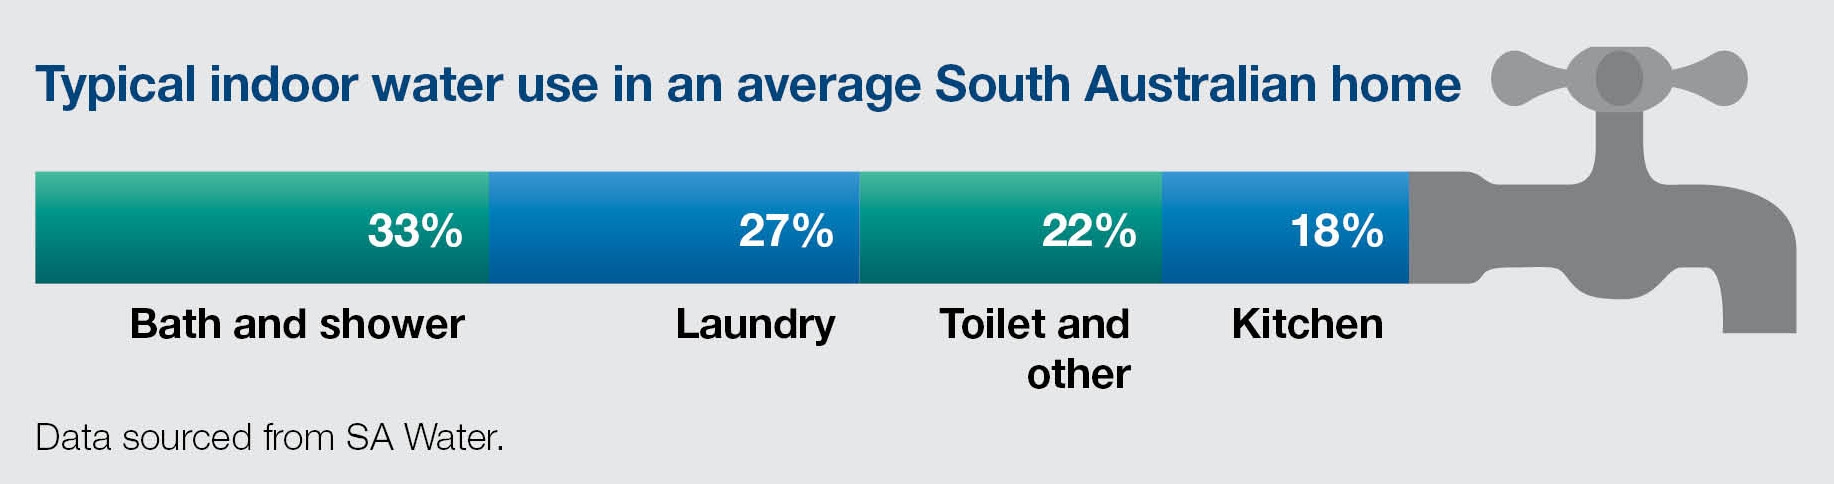 Typical indoor water use in an average South Australian home. Bath and shower, 33 per cent. Laundry, 27 per cent. Toilet and other, 22 per cent. Kitchen, 18 per cent.